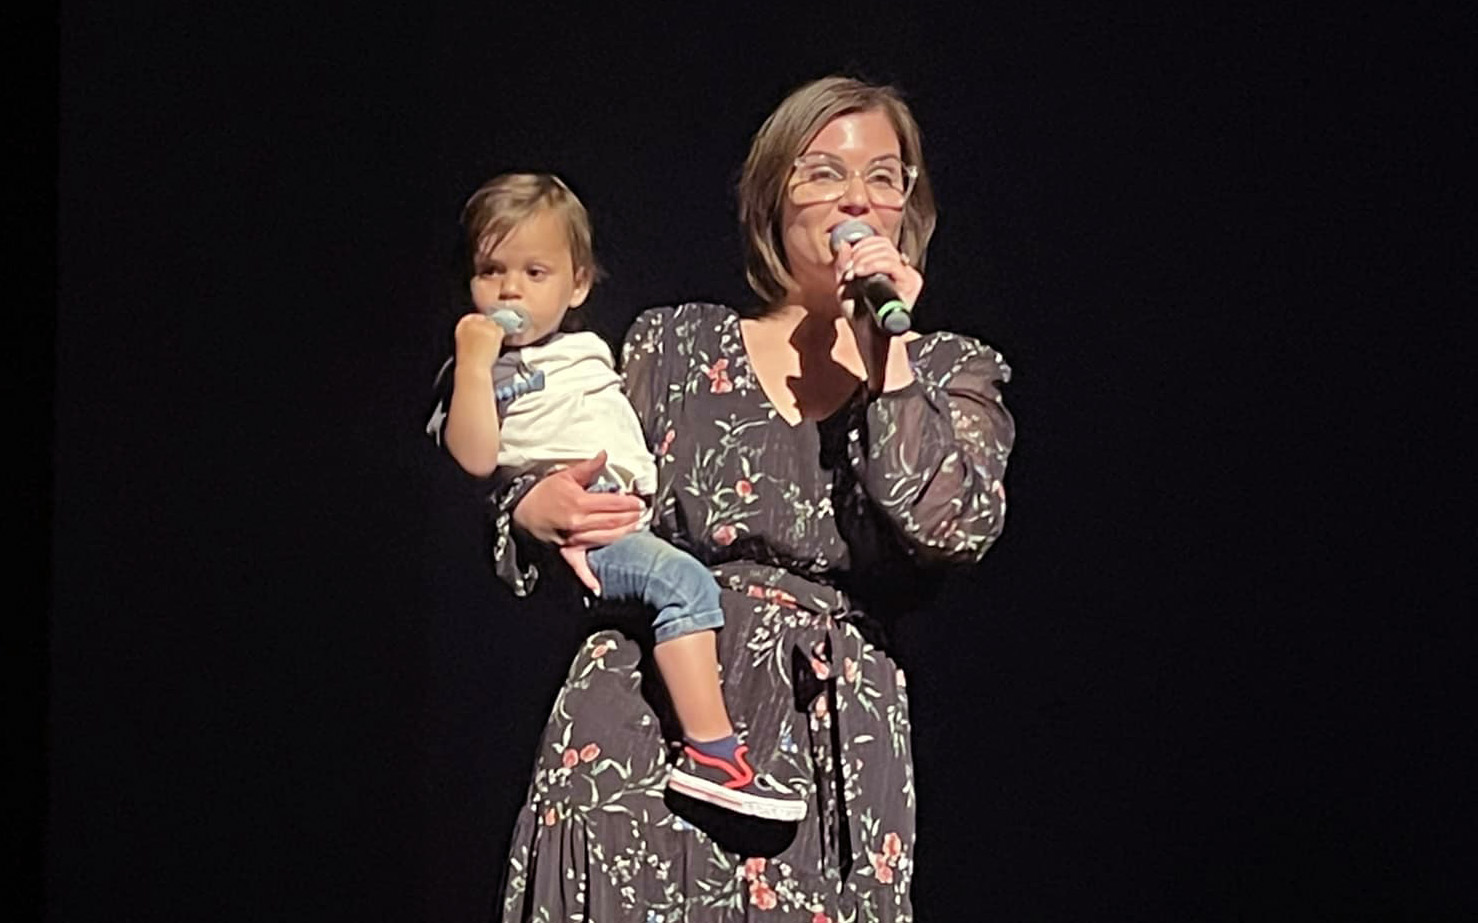 Jaymee holding her then one-year-old son on her hip, with a microphone in the other hand, giving a welcome speech onstage during her production of Mean Girls Jr.